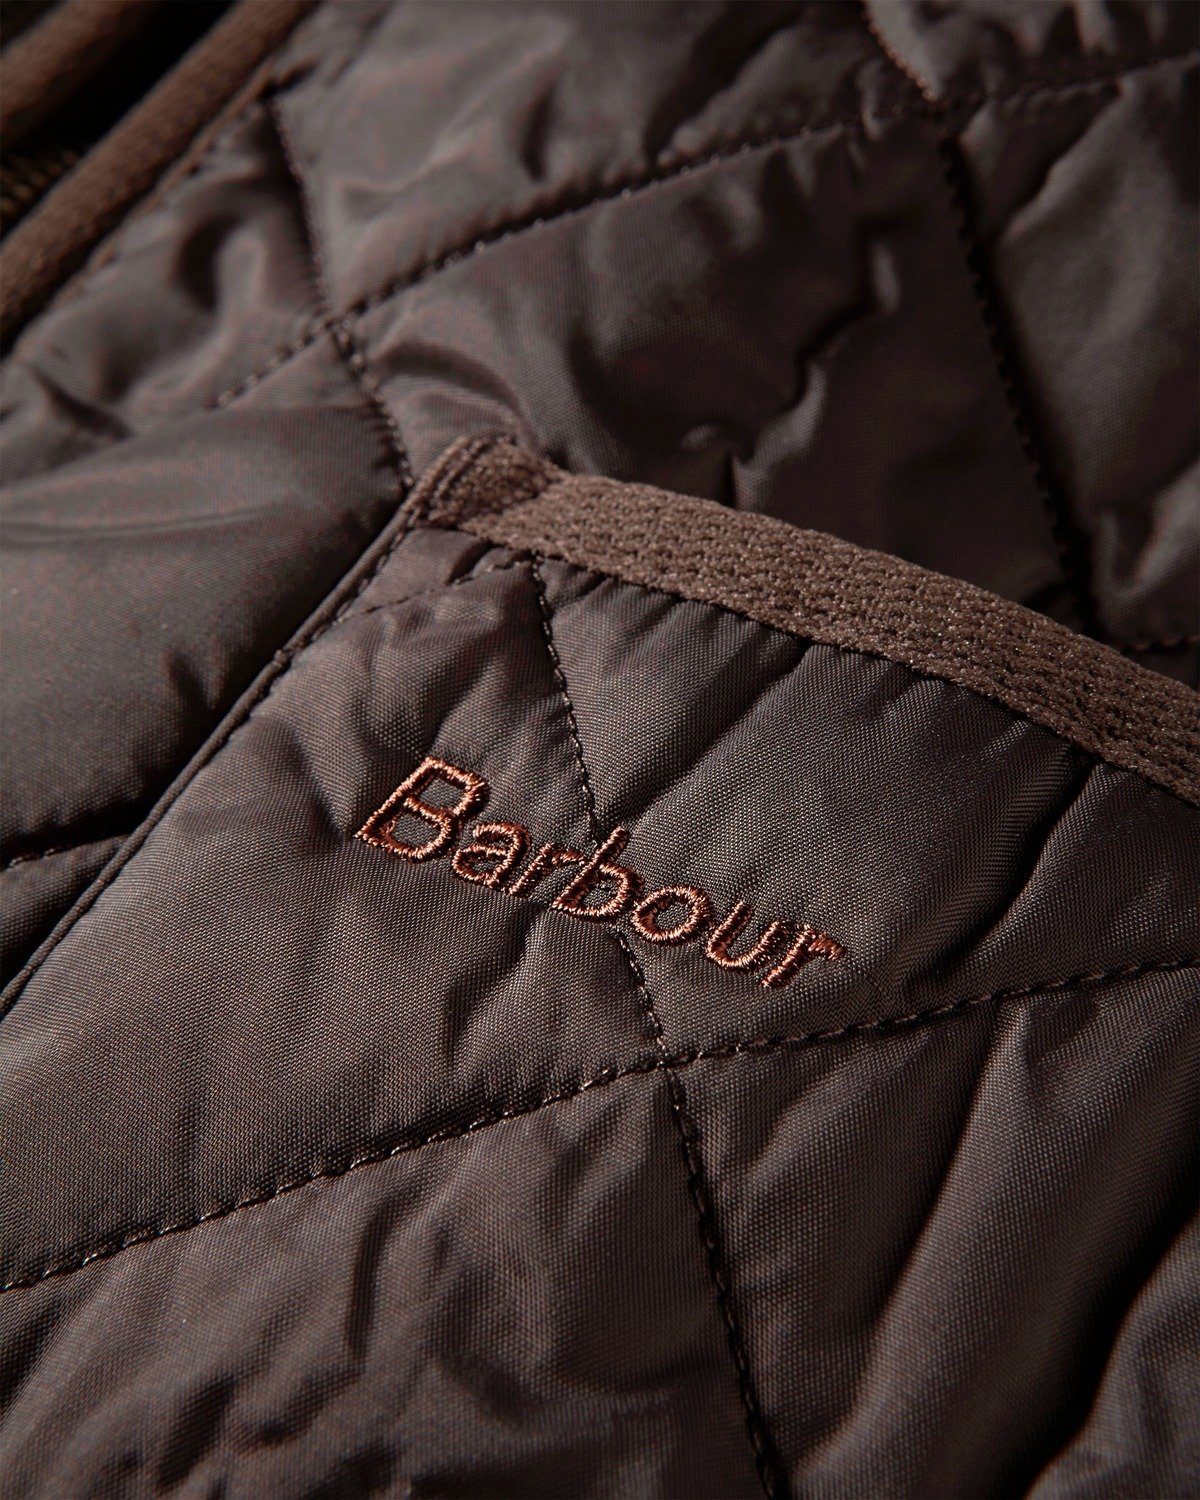 Barbour Steppweste Weste Quilted Rustic